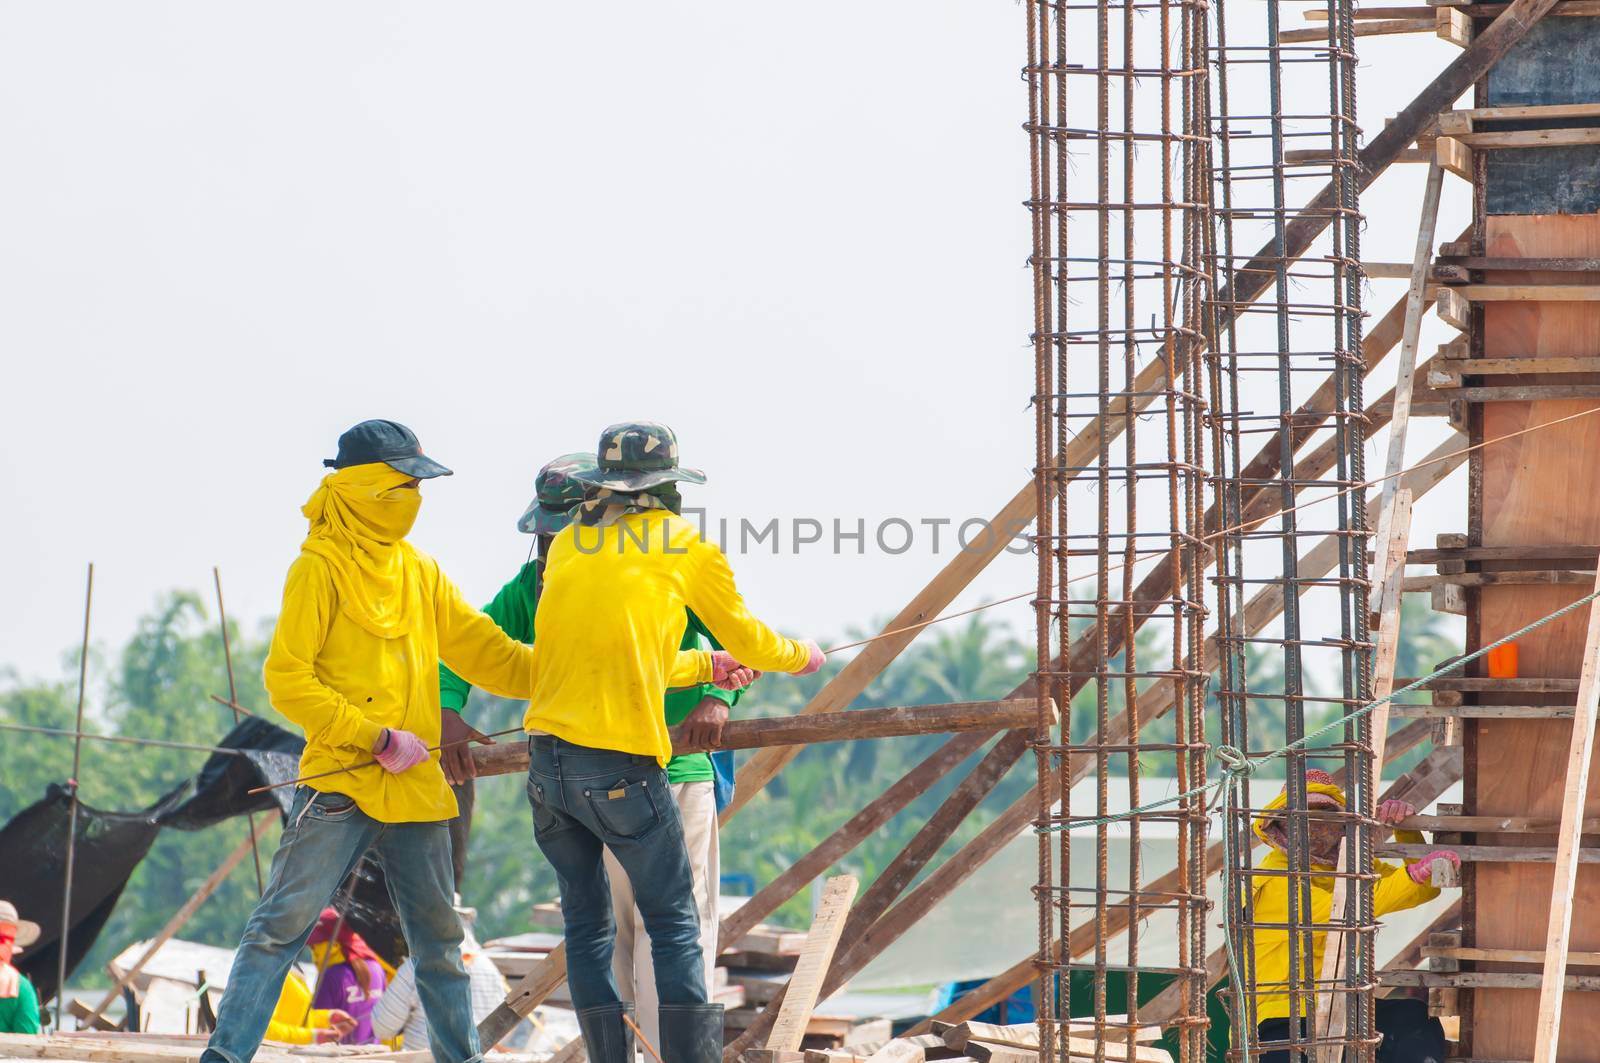 Workers at the construction site  by Sorapop